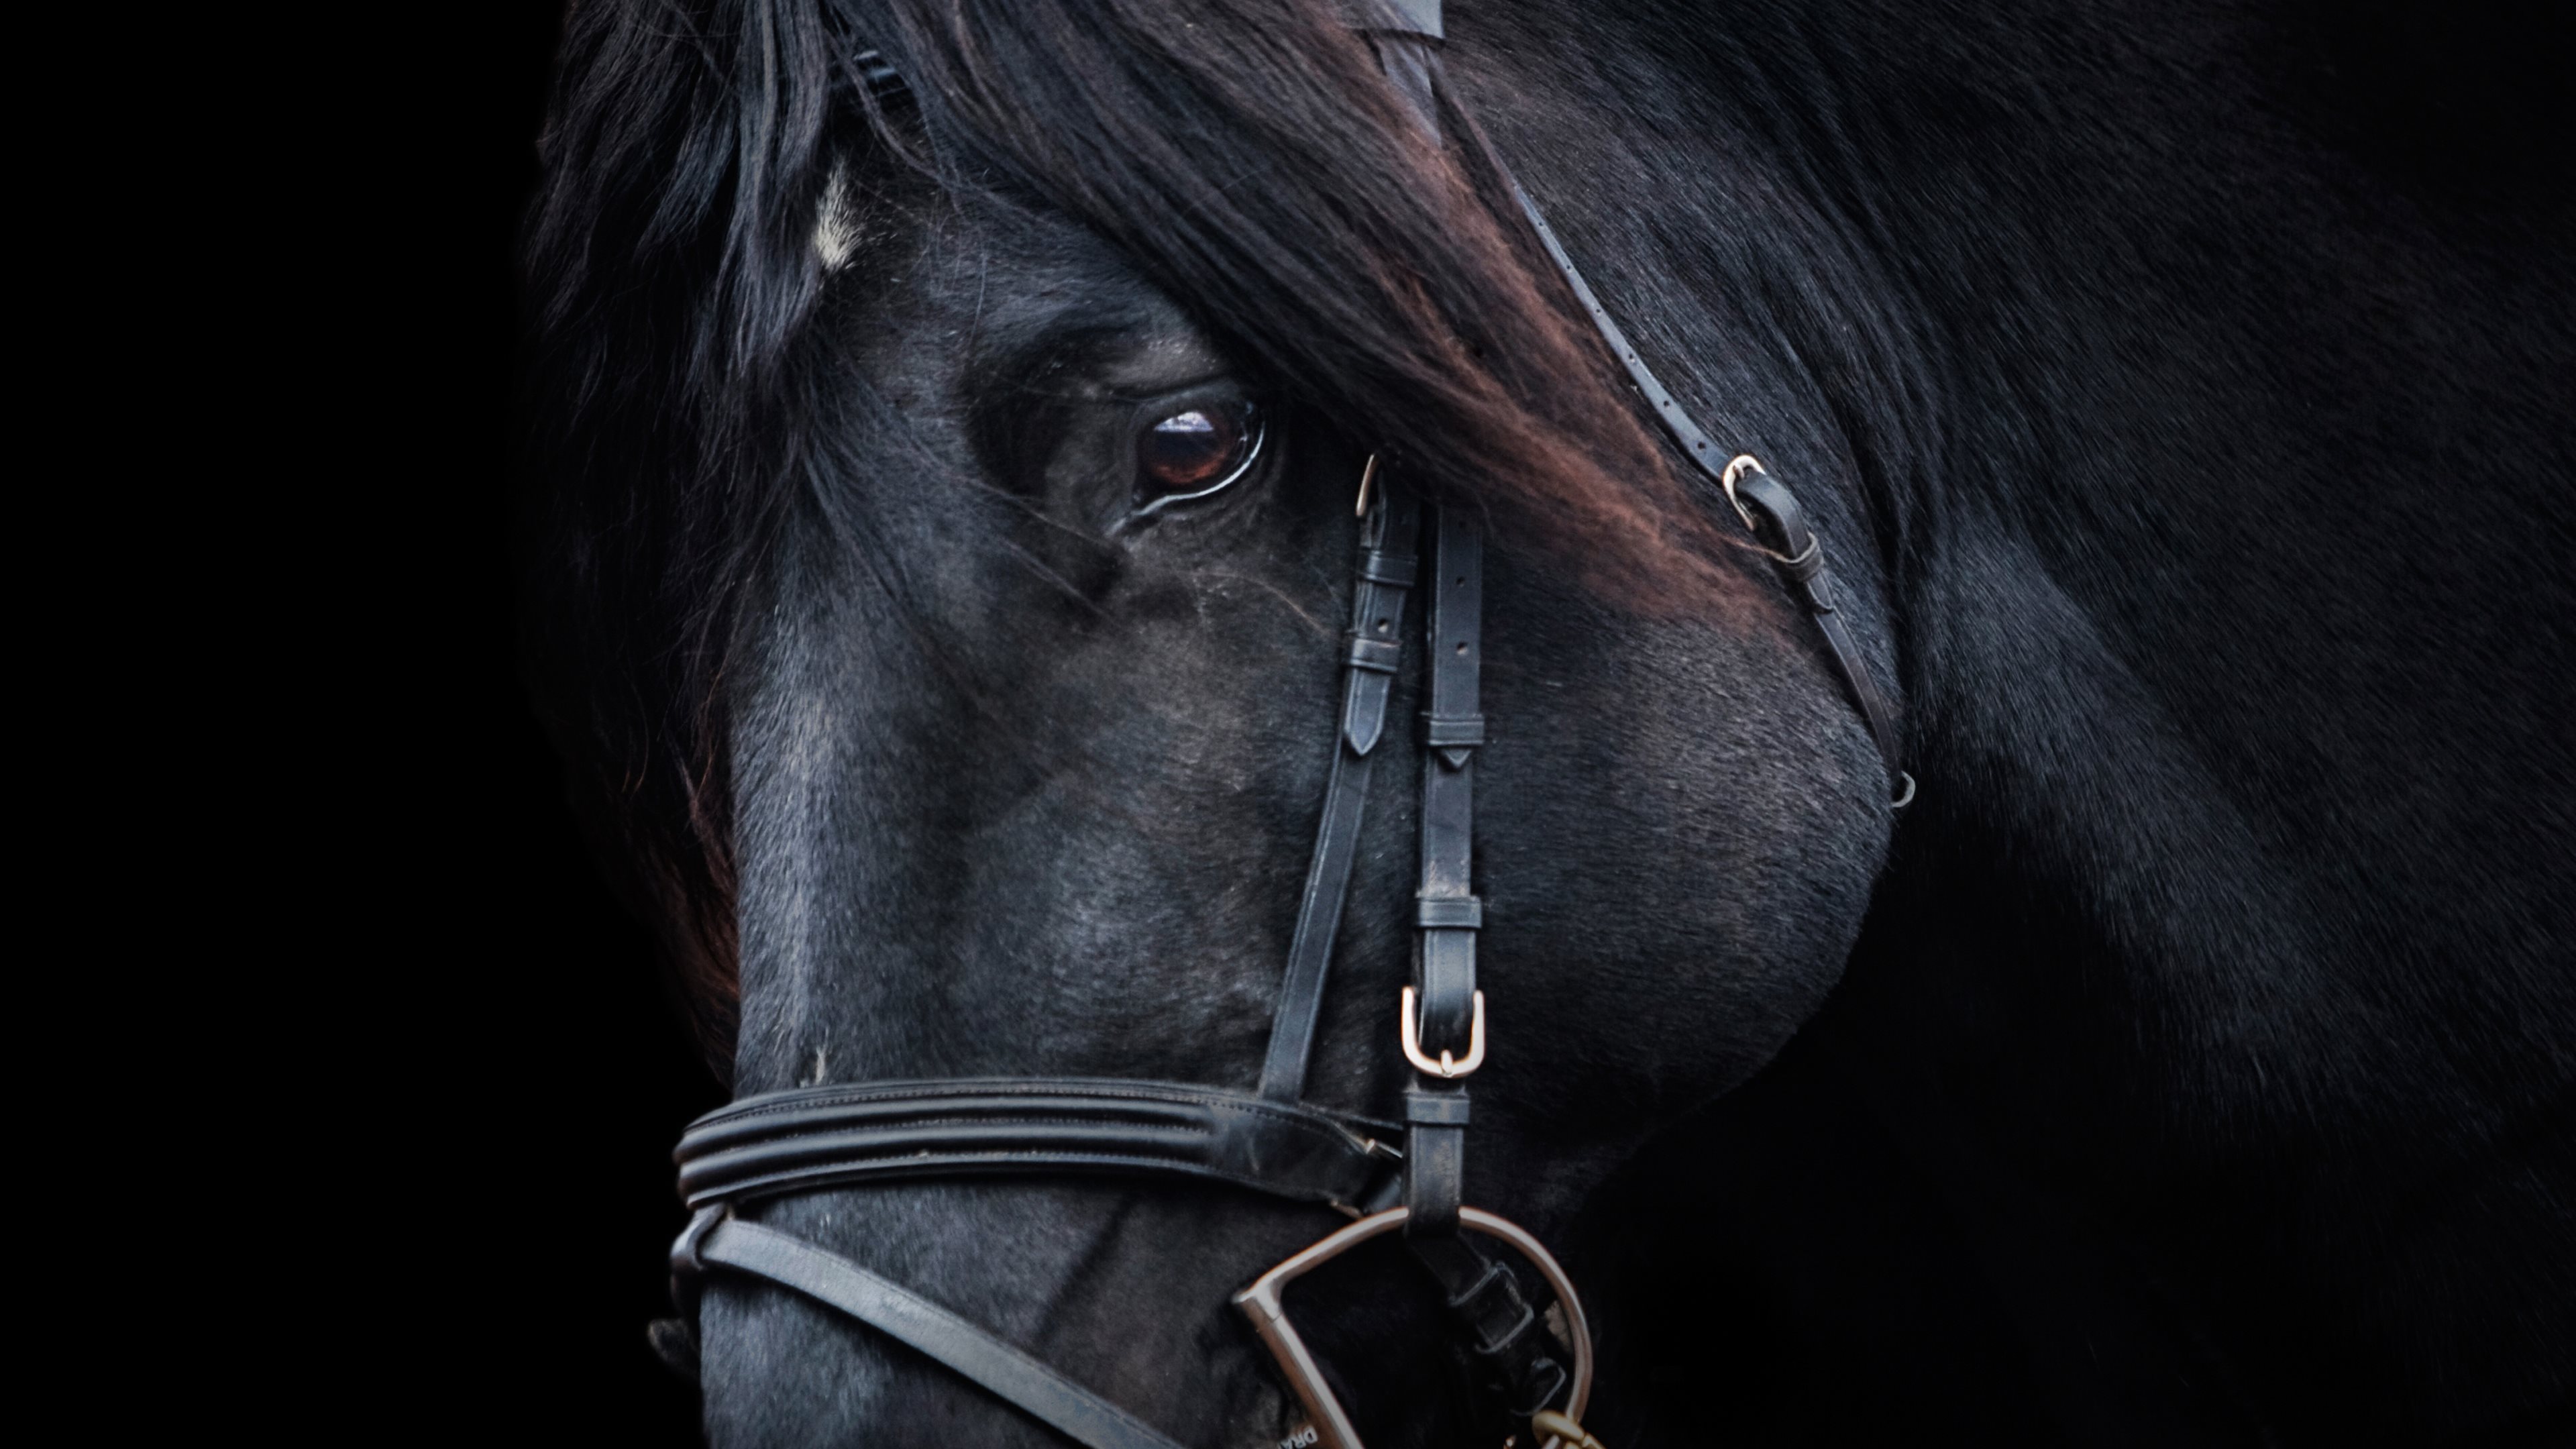 rugby wallpaper iphone,bridle,horse,halter,horse tack,rein